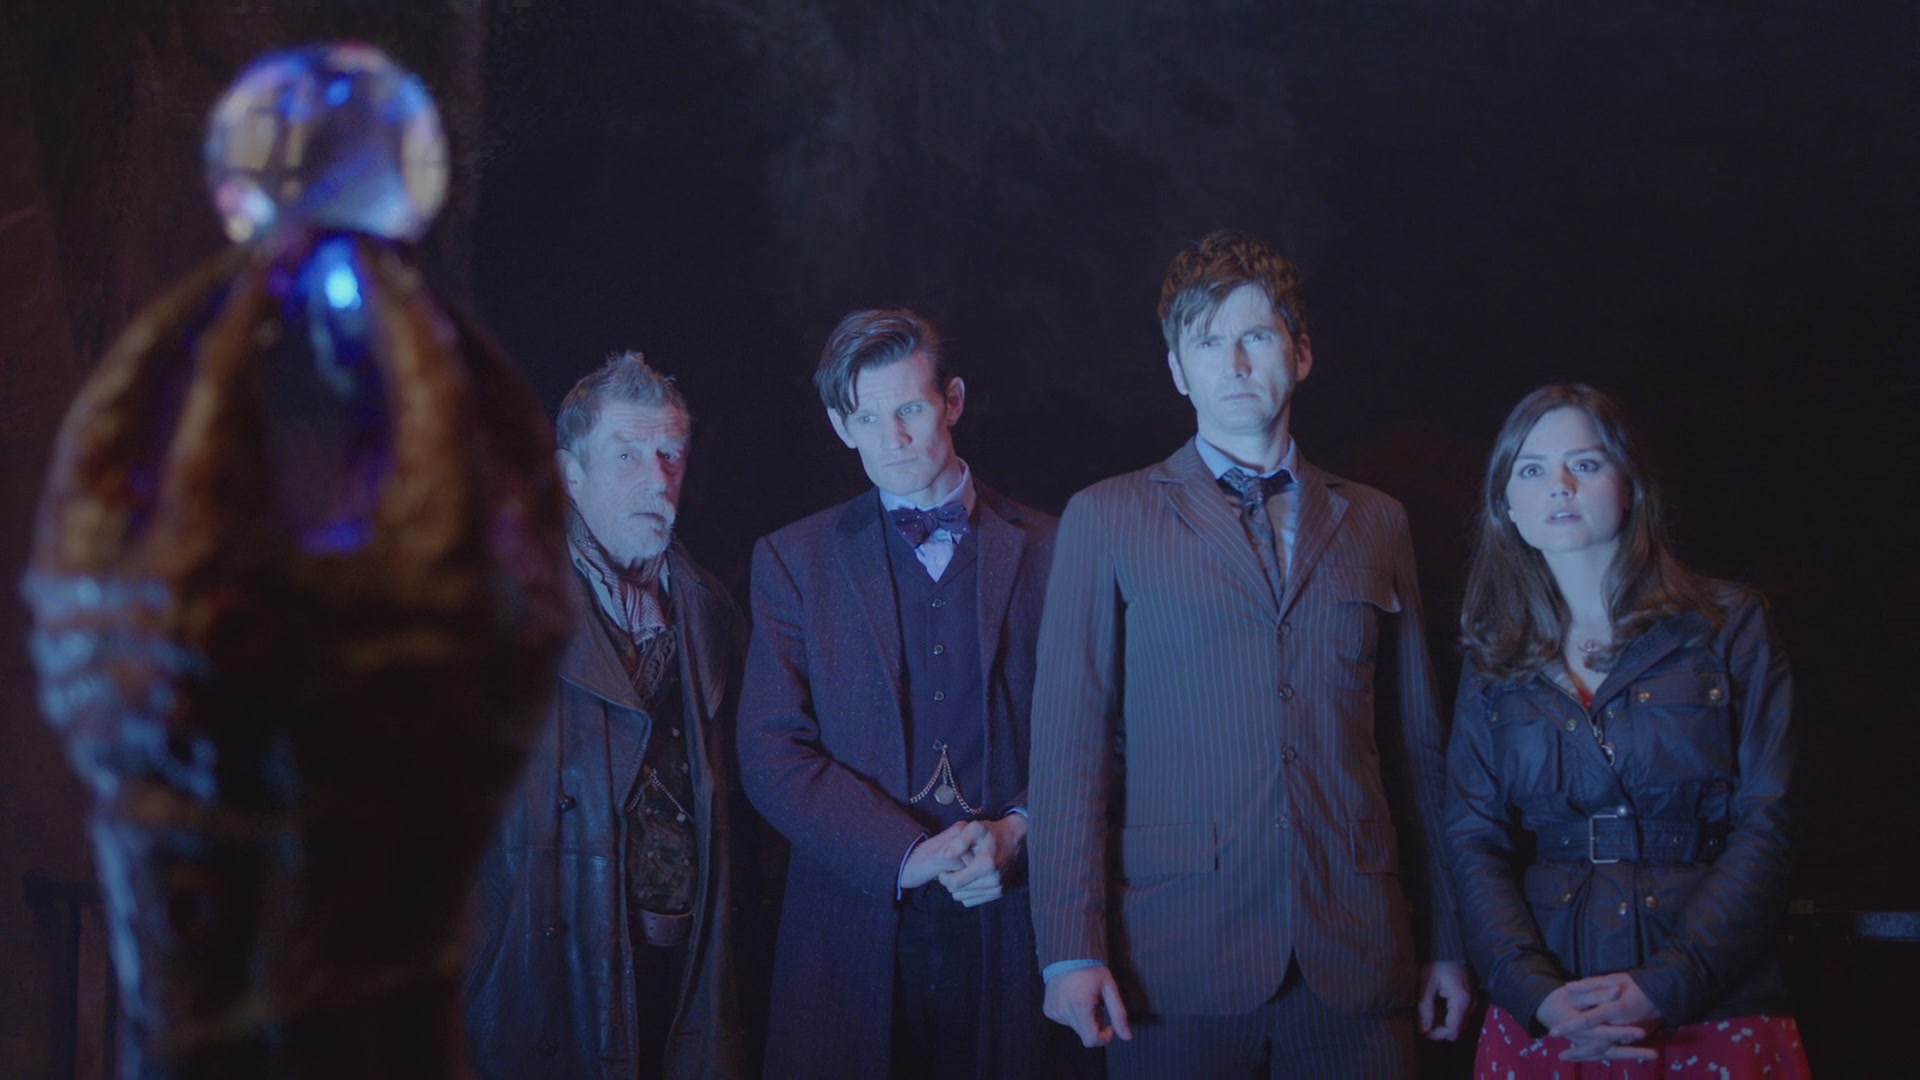 DayOfTheDoctor-Caps-0787.jpg